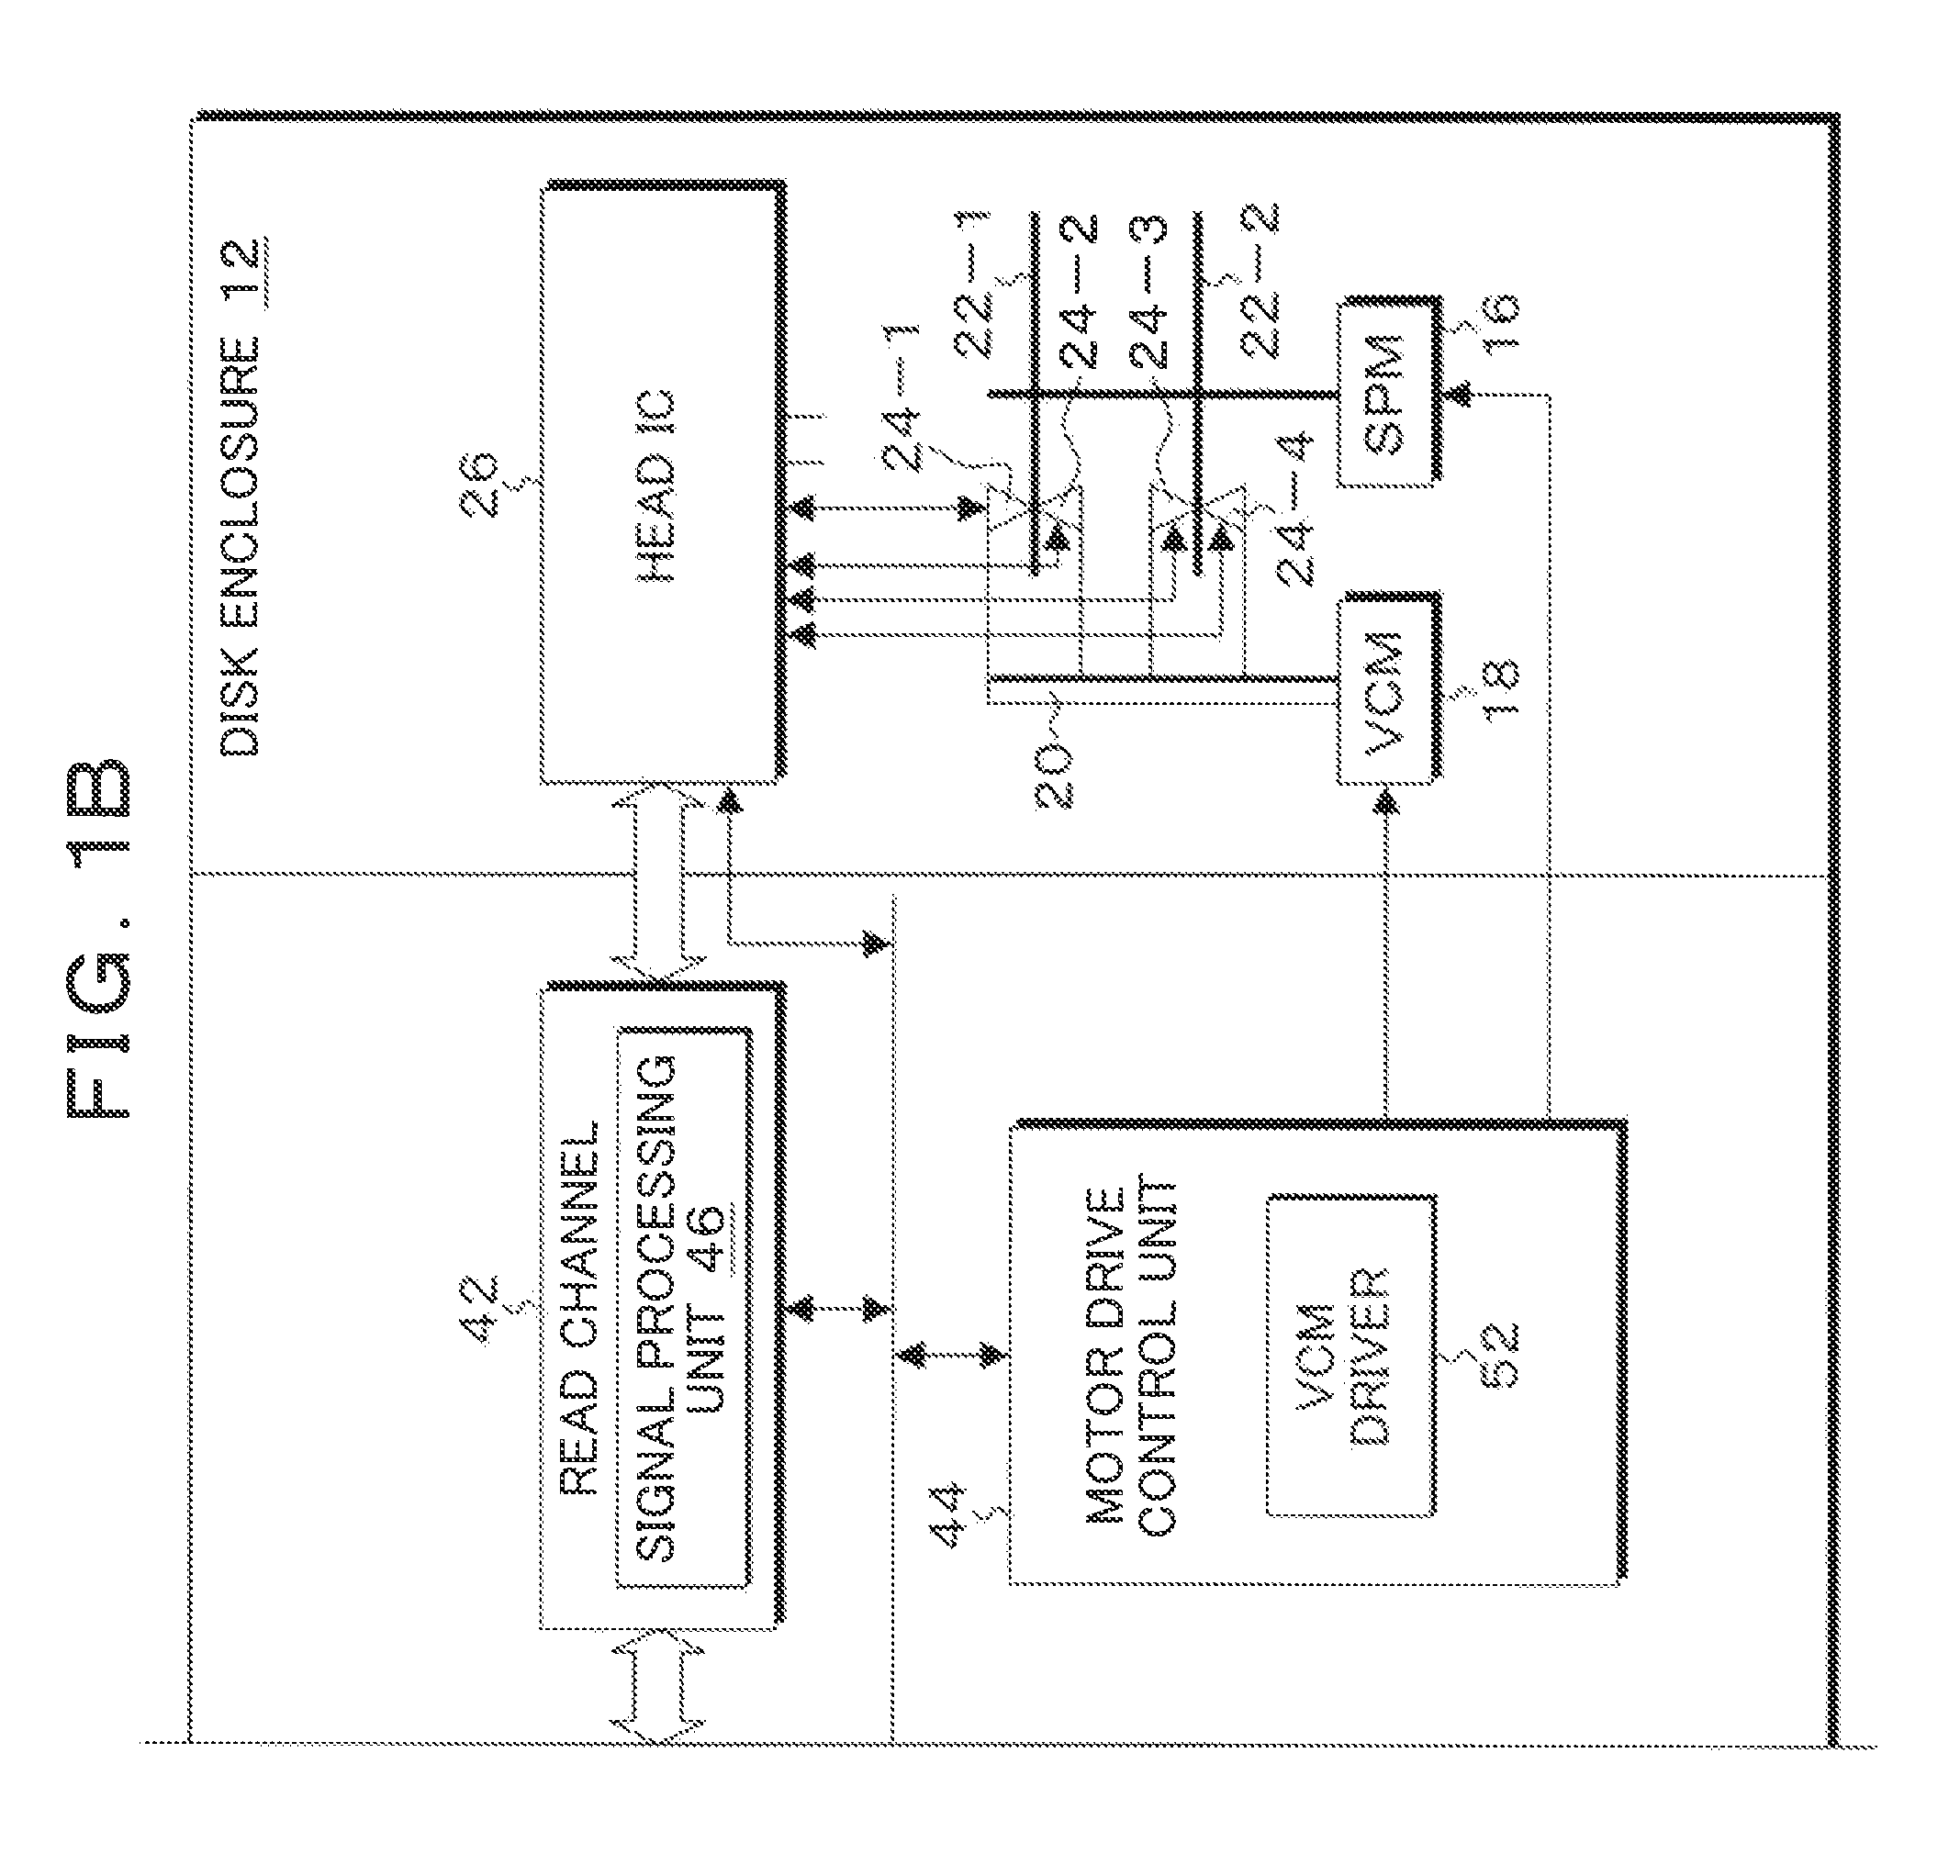 Storage apparatus, control method, and control device which enable or disable compensation control